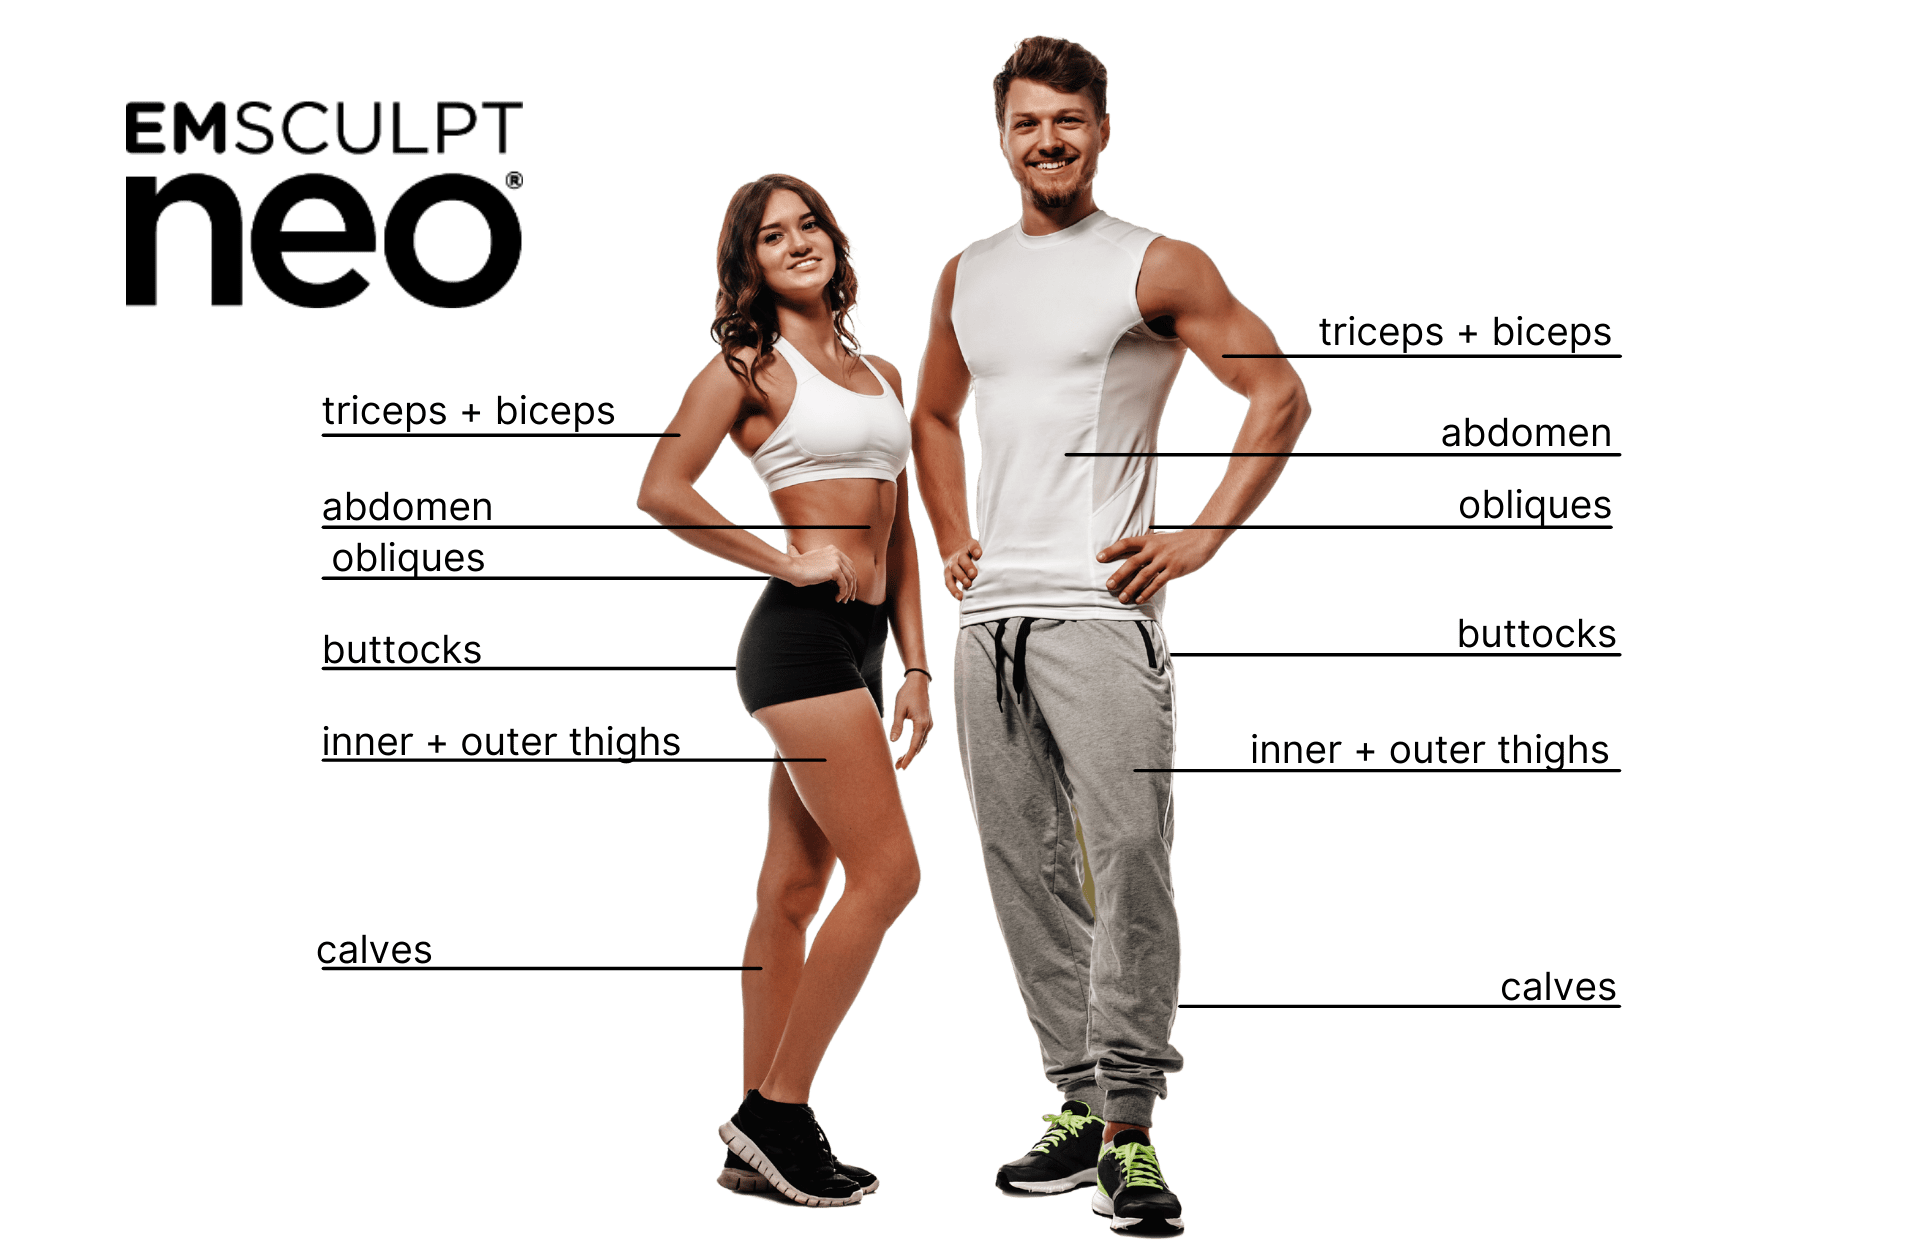 Man And Woman Standing, Showing Off Their Emsculpt Neo Sculpted Bodies. - Treatment Areas Are Labeled On The Man And Women: Triceps And Biceps, Abdomen, Obliques, Buttocks, Inner And Outer Thighs, And Calves.